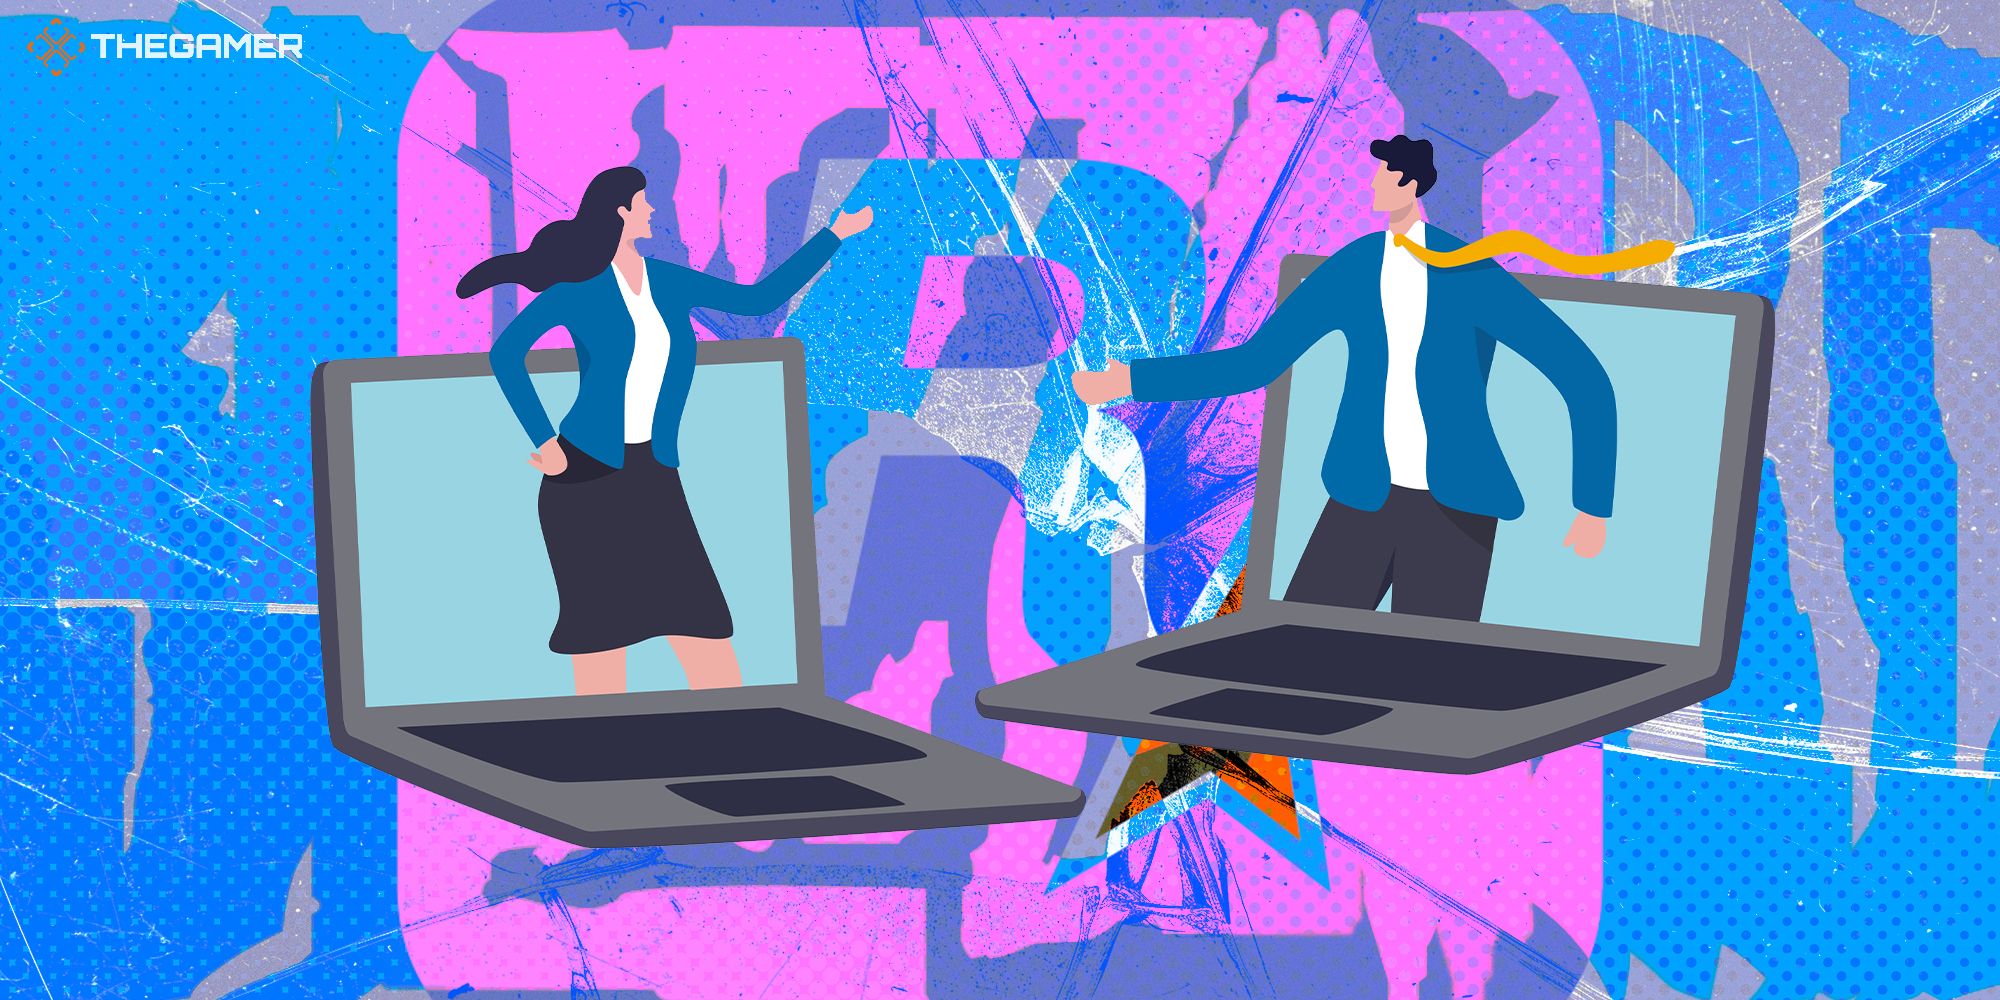 The background of the image is a distressed, pink and blue version of Rockstar Games' logo. Two illustrated people inside laptop screens in business attire talk to each other.